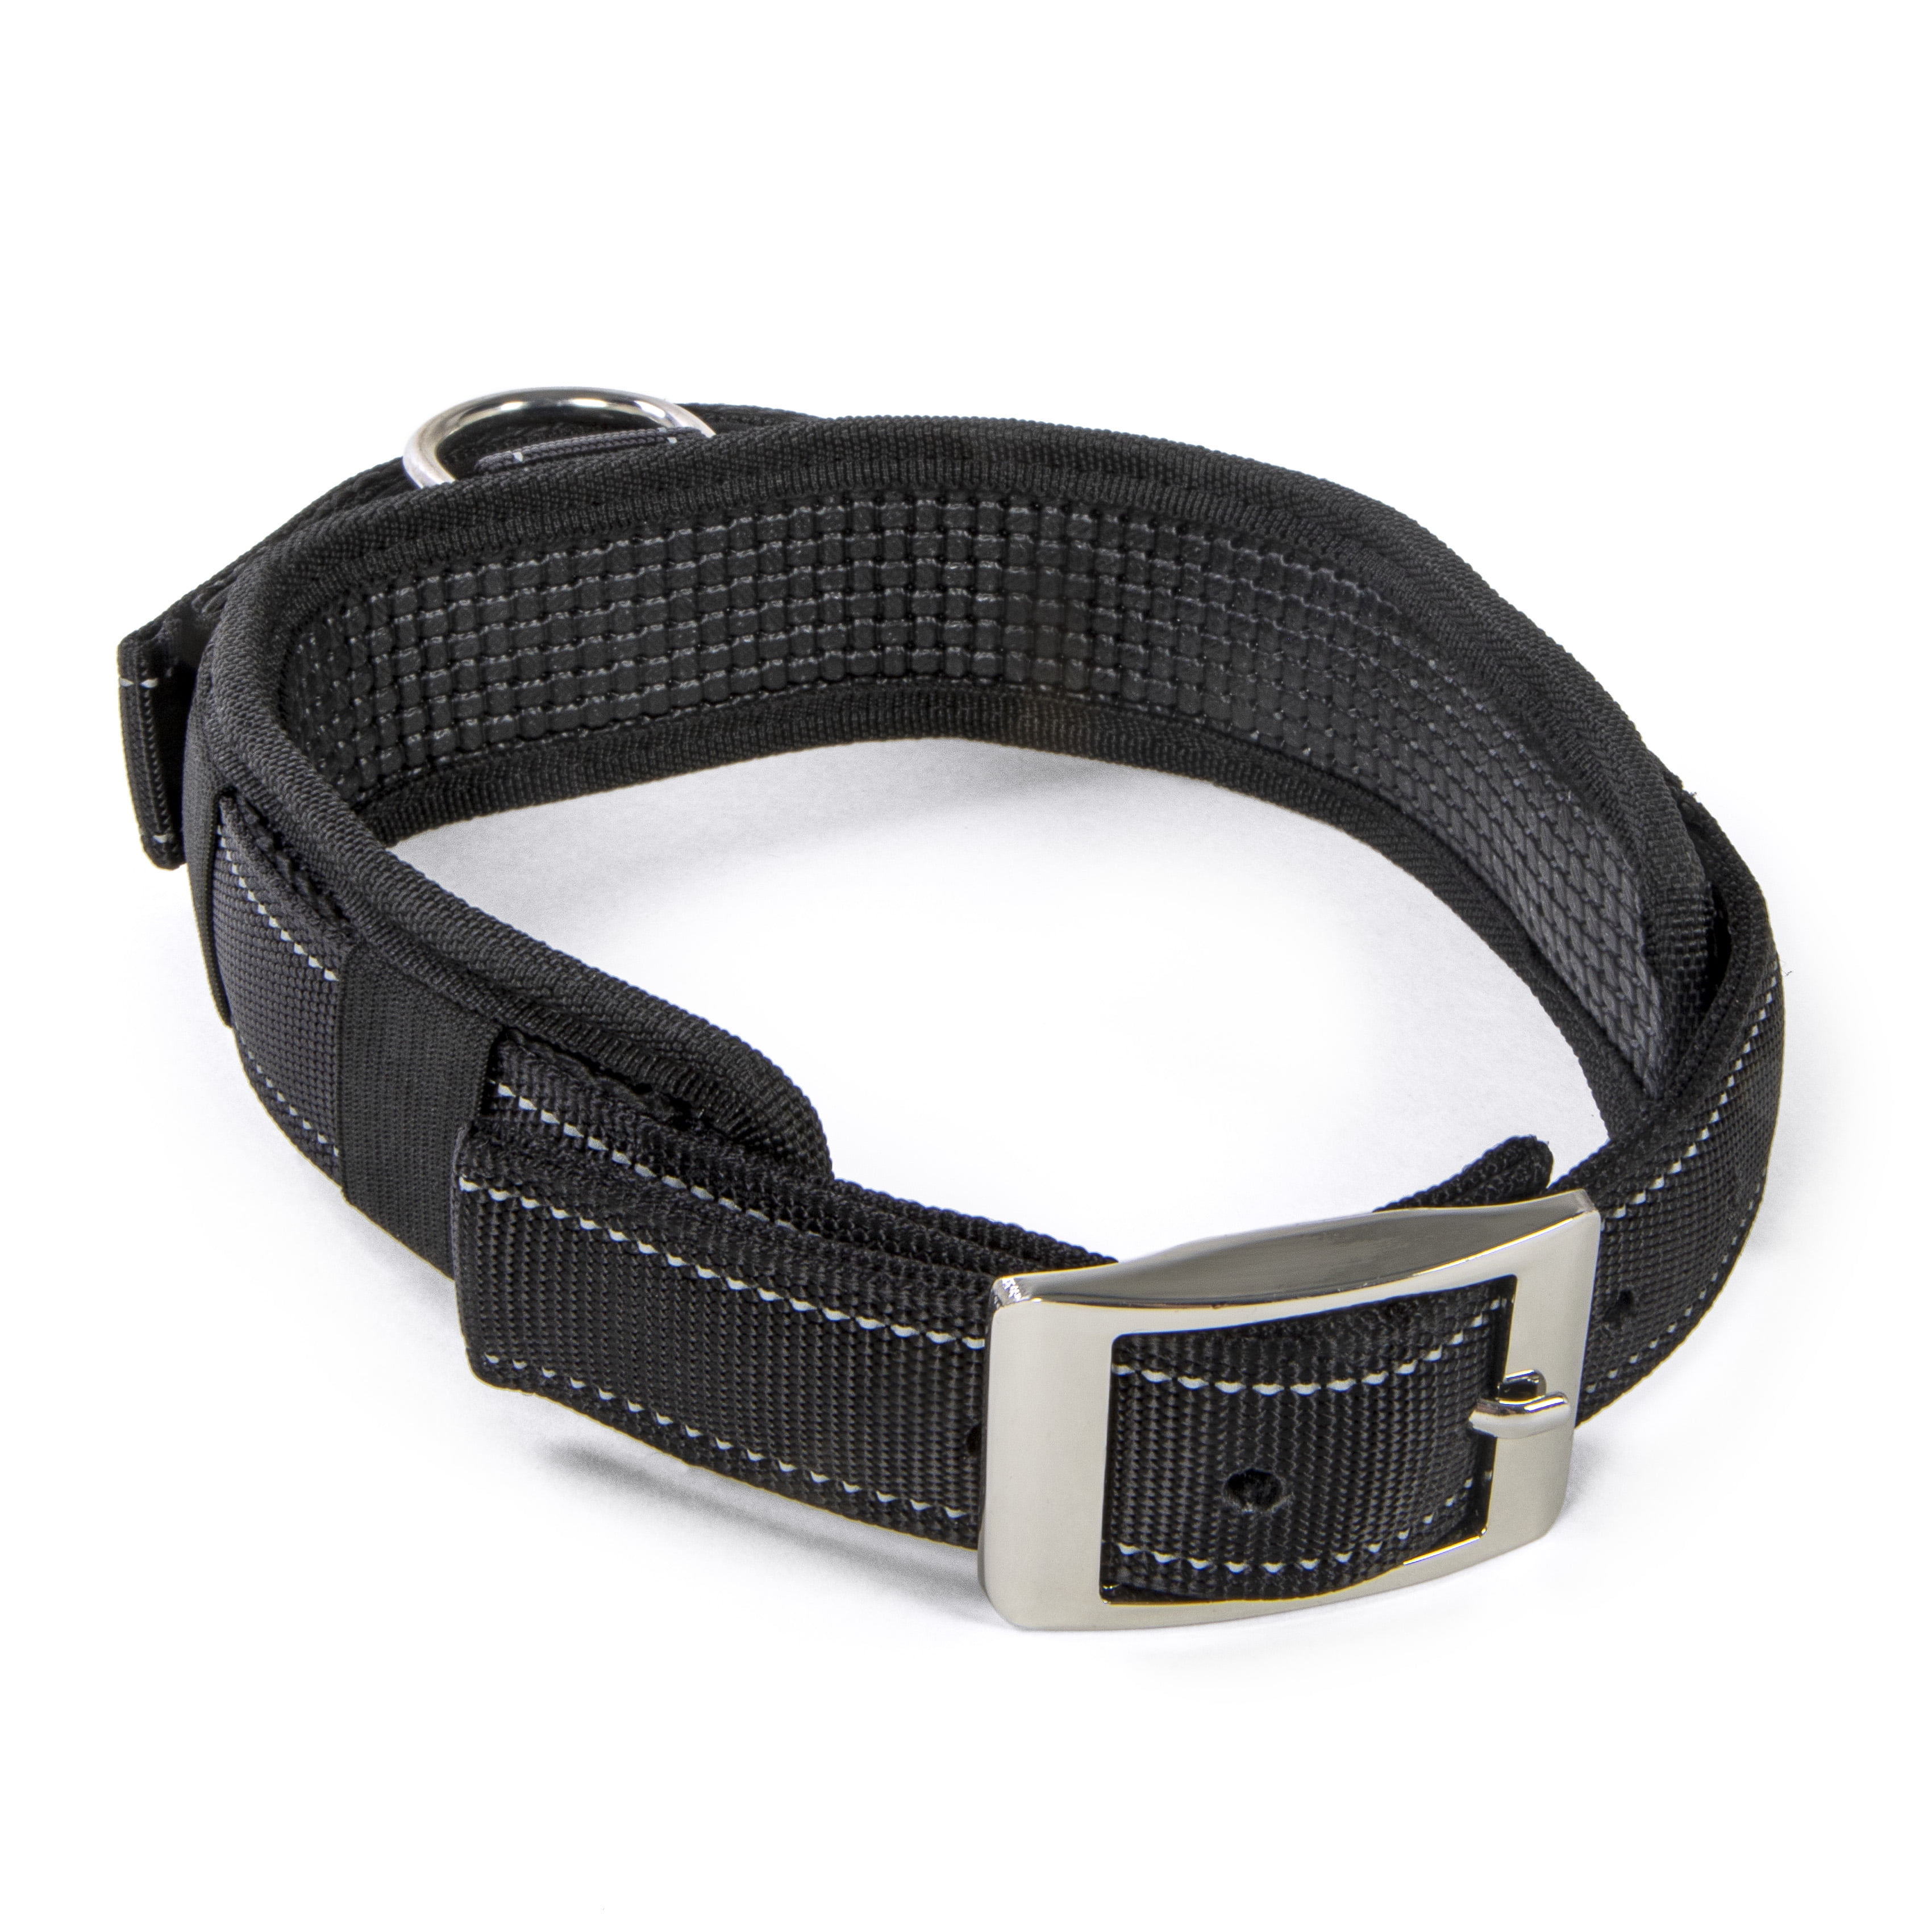 X-Large Black & White Leather Dog Collar with a Handle for Firm Control 